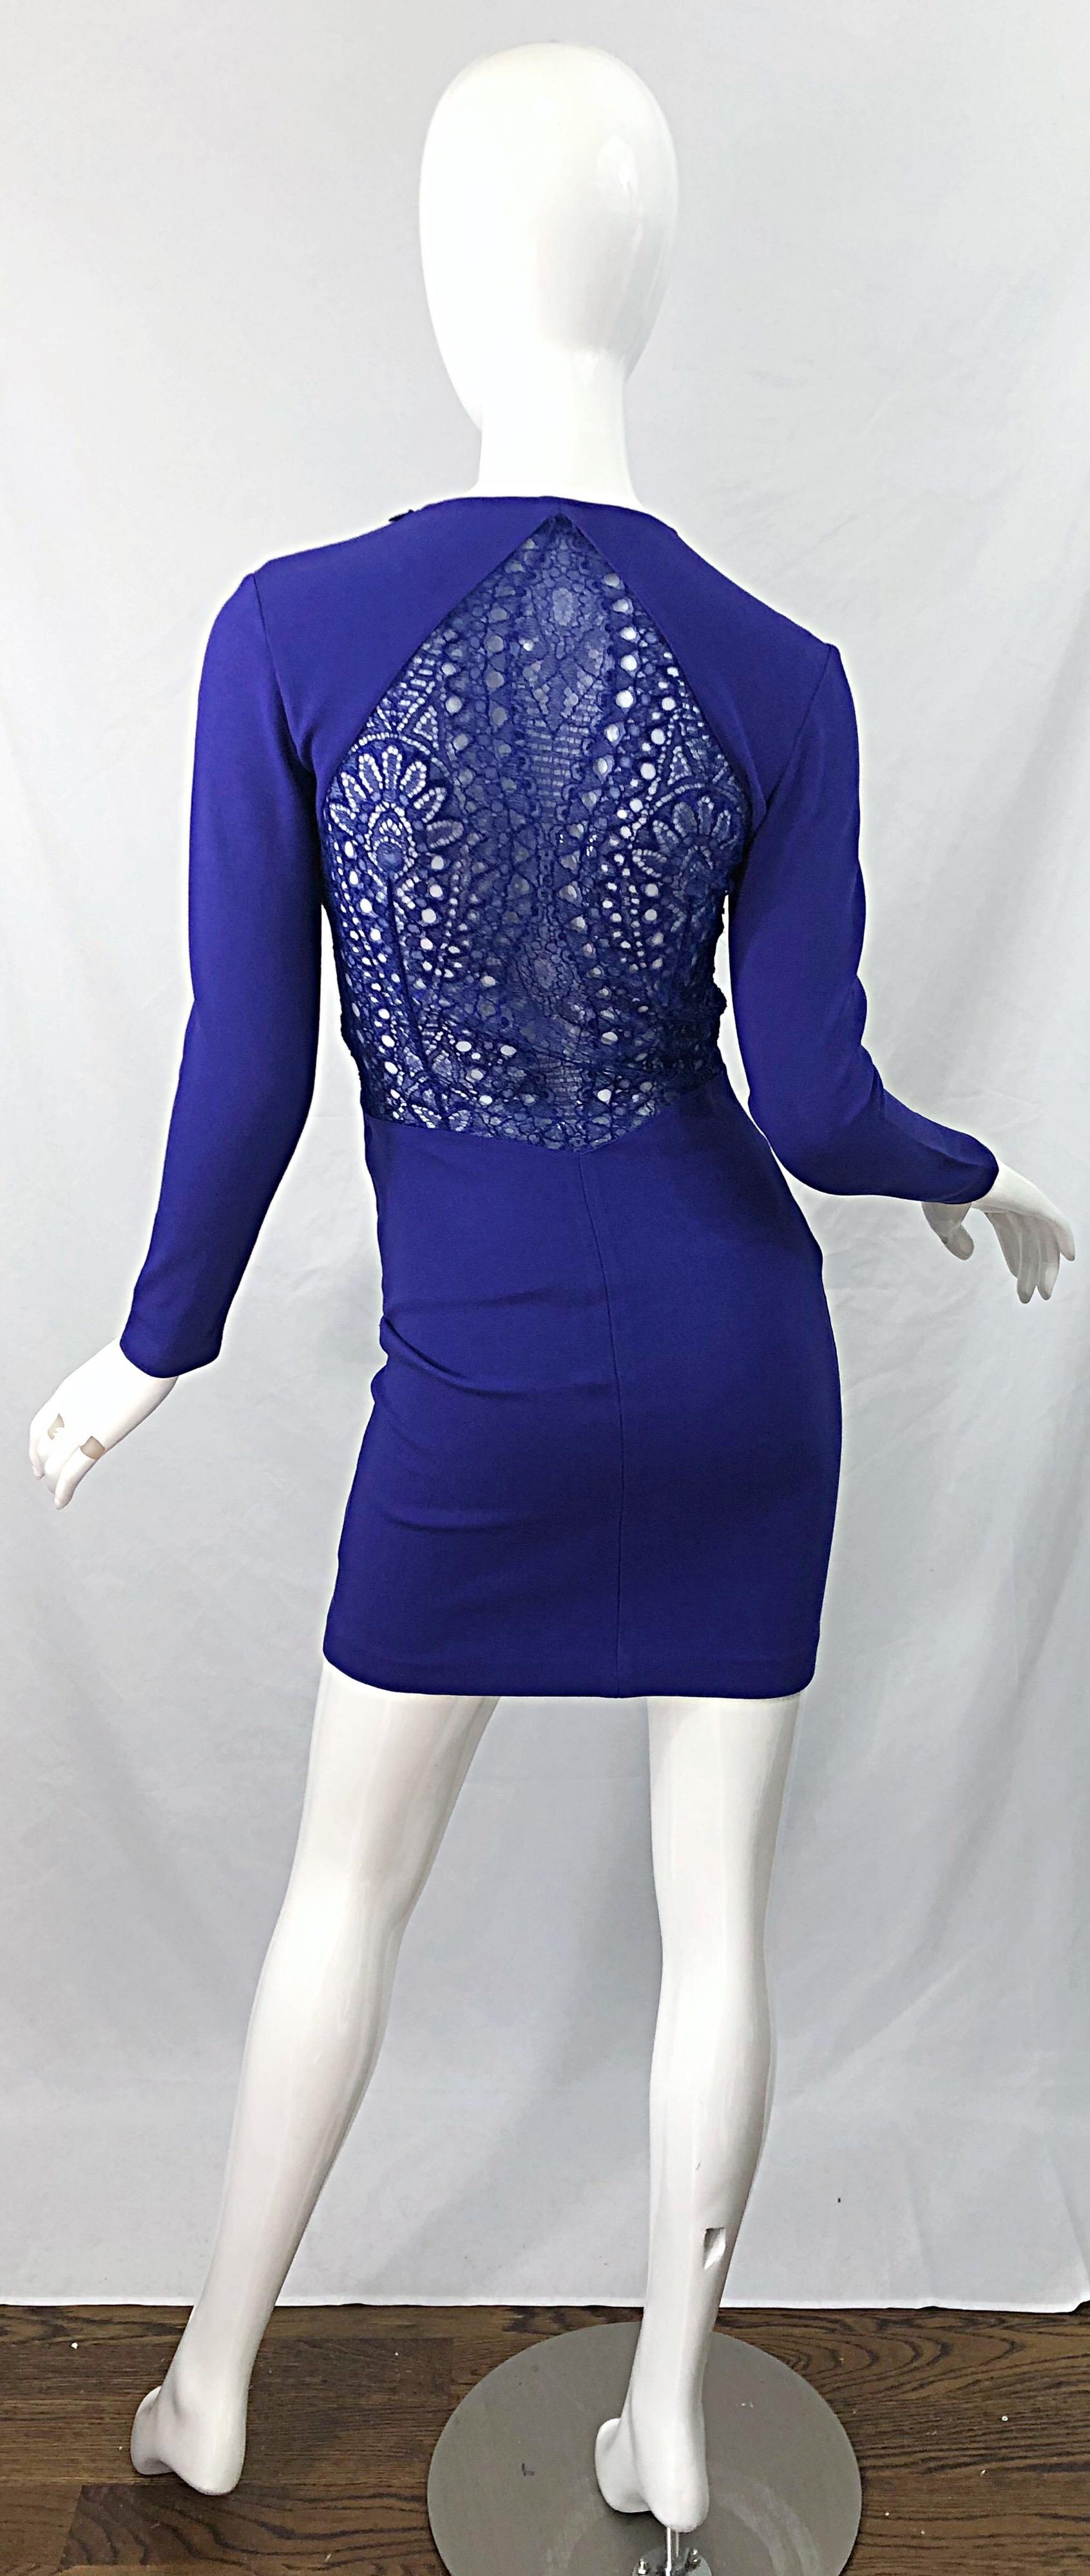 Emilio Pucci Fall 2012 Purple Rayon Lace Cut Out Long Sleeve Bodycon Dress For Sale 1